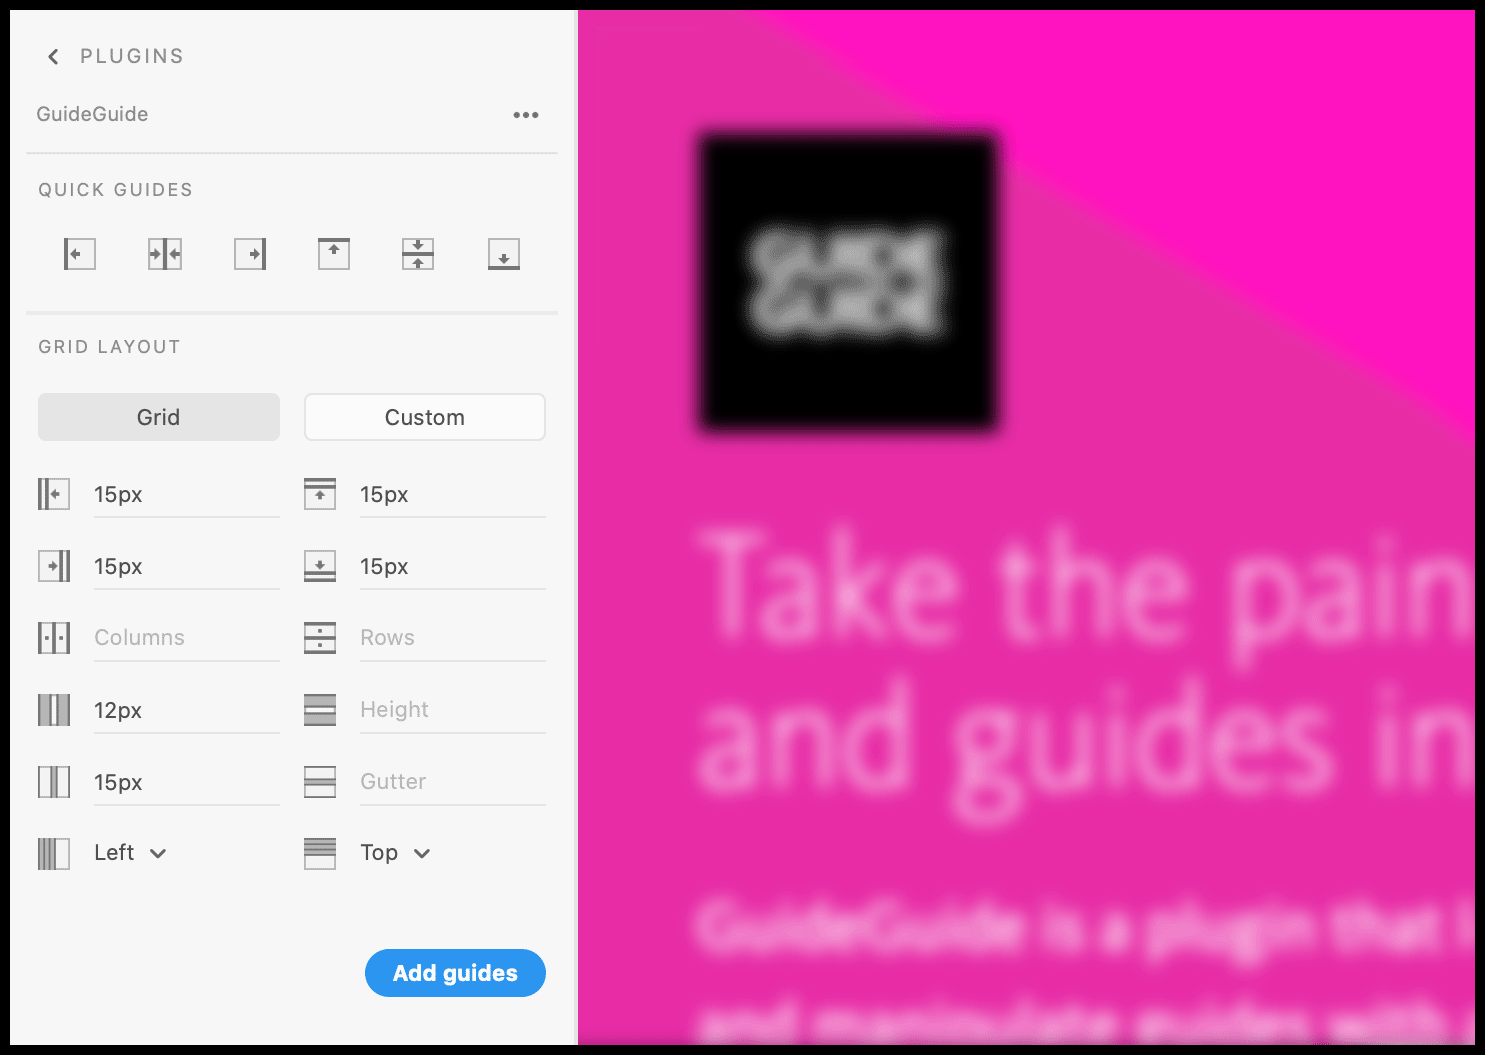 A screenshot showing the GuideGuide panel over an Adobe XD document.